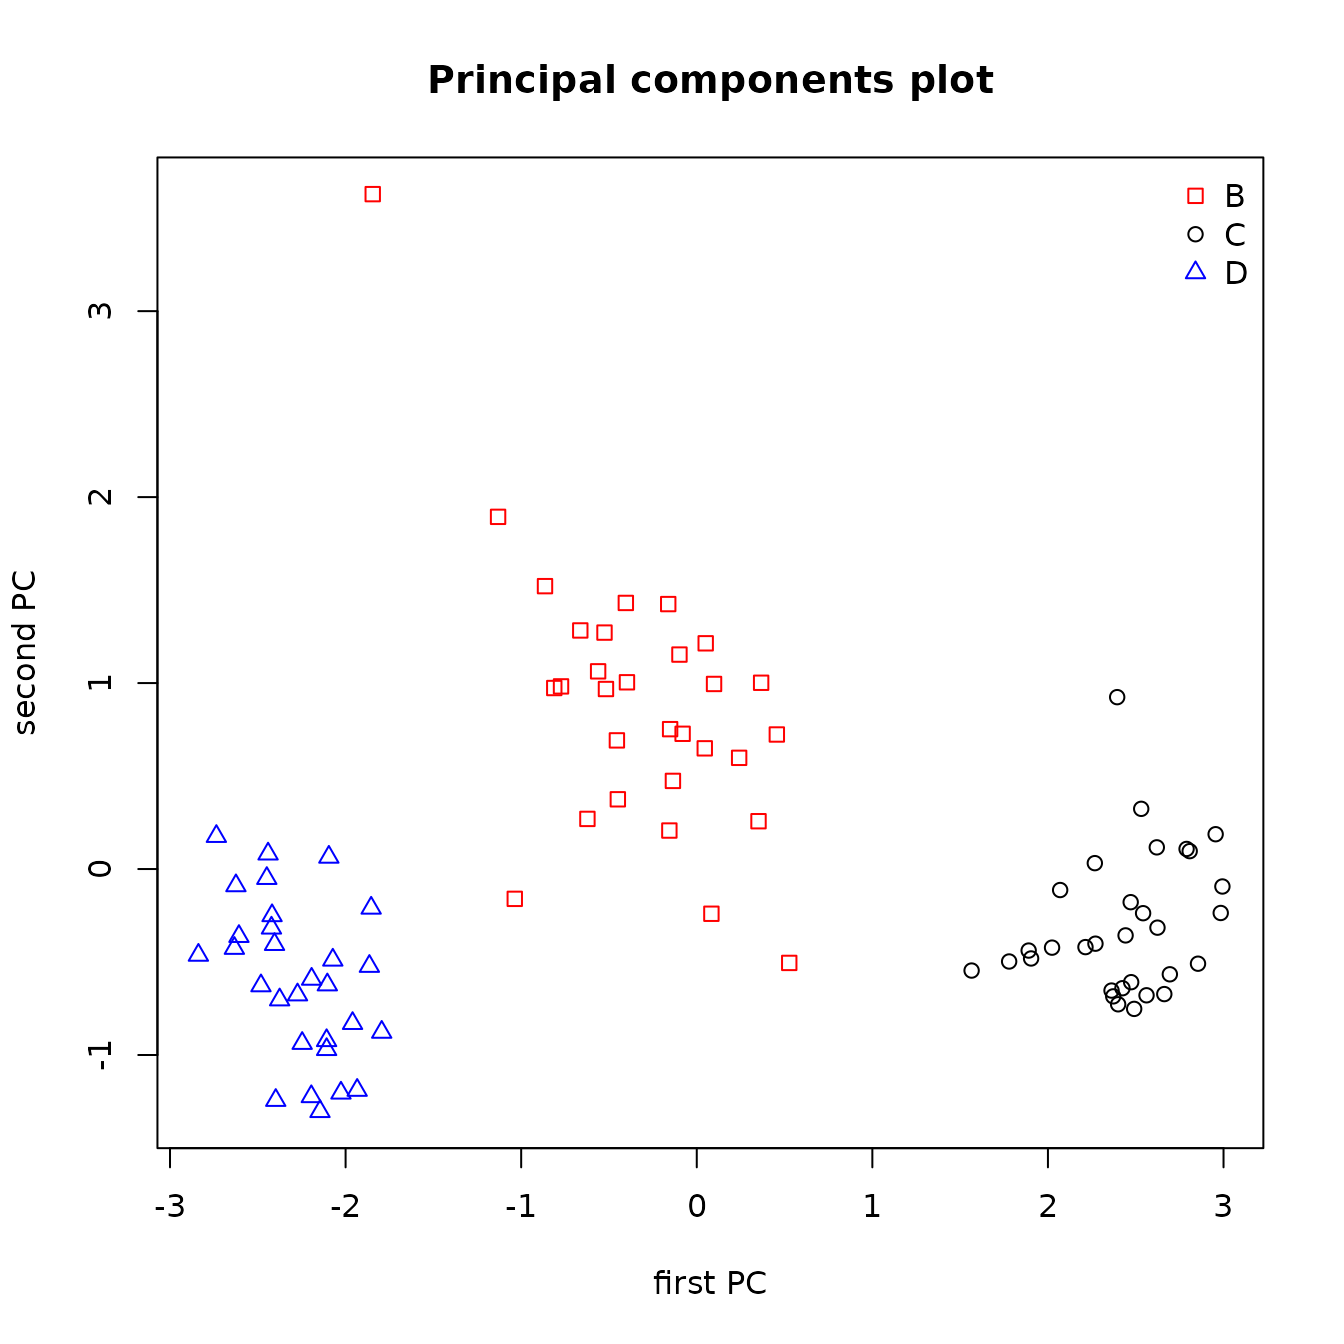 Figure 7.4: Principal components plot of the predicted sources of the obsidian artifacts from a random forests analysis.